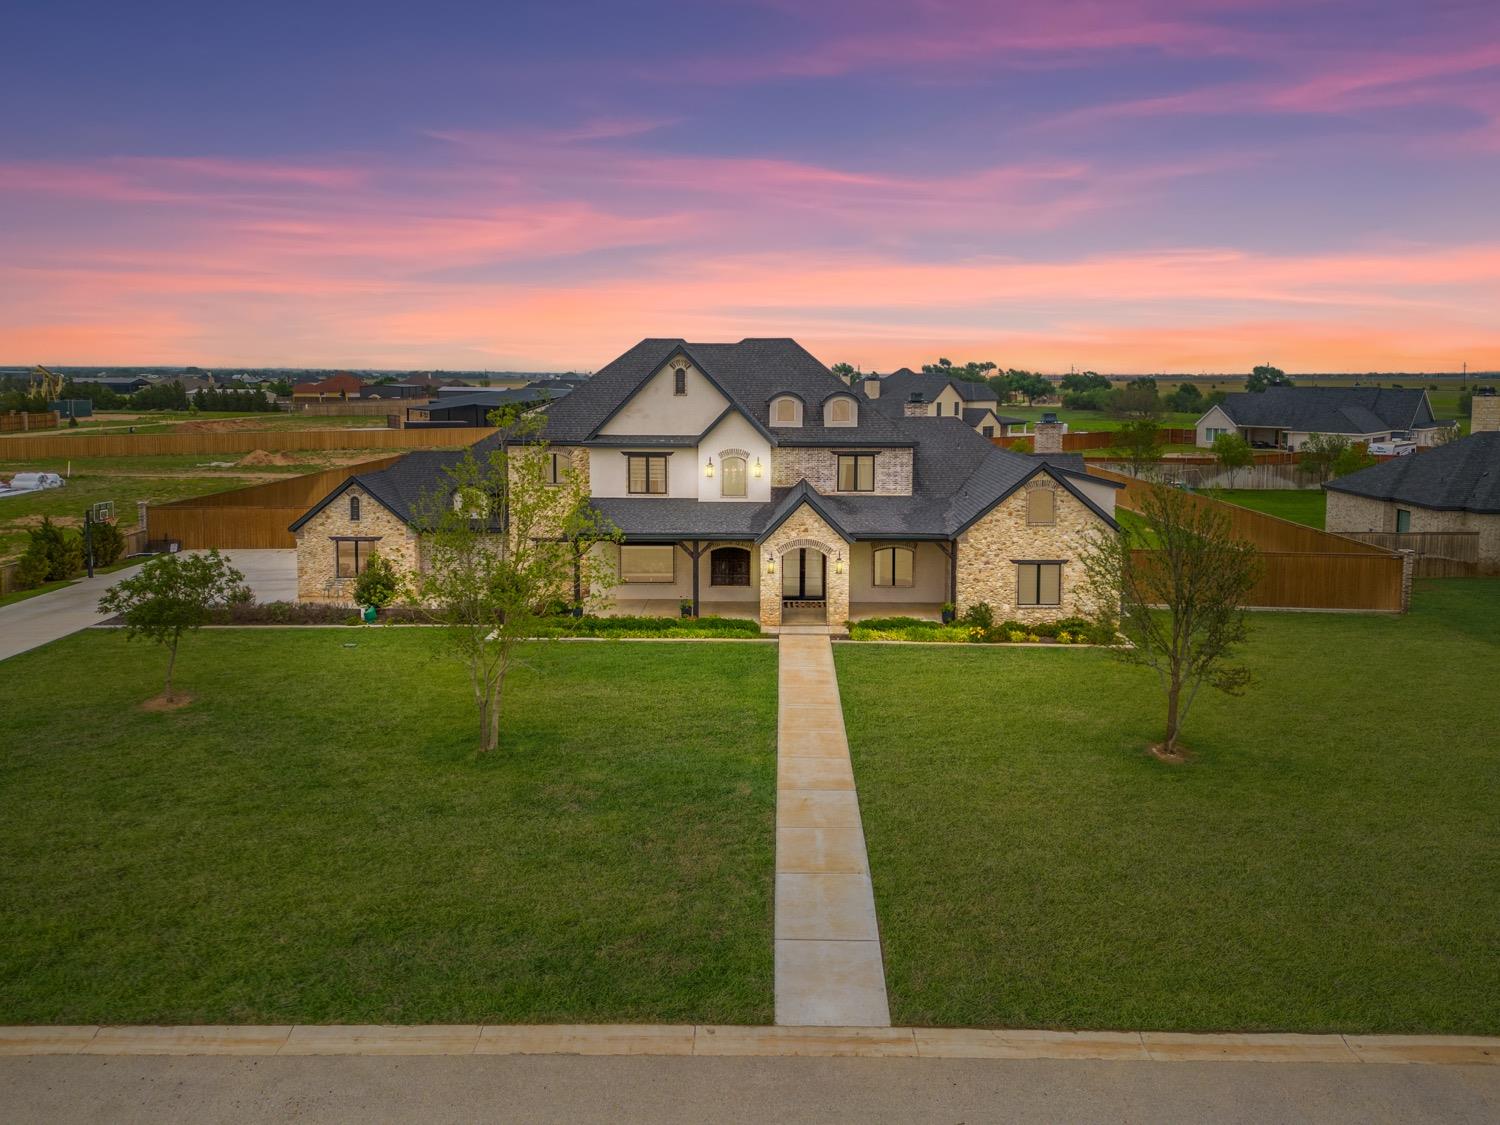 4812 County Road 1450 - Shallowater